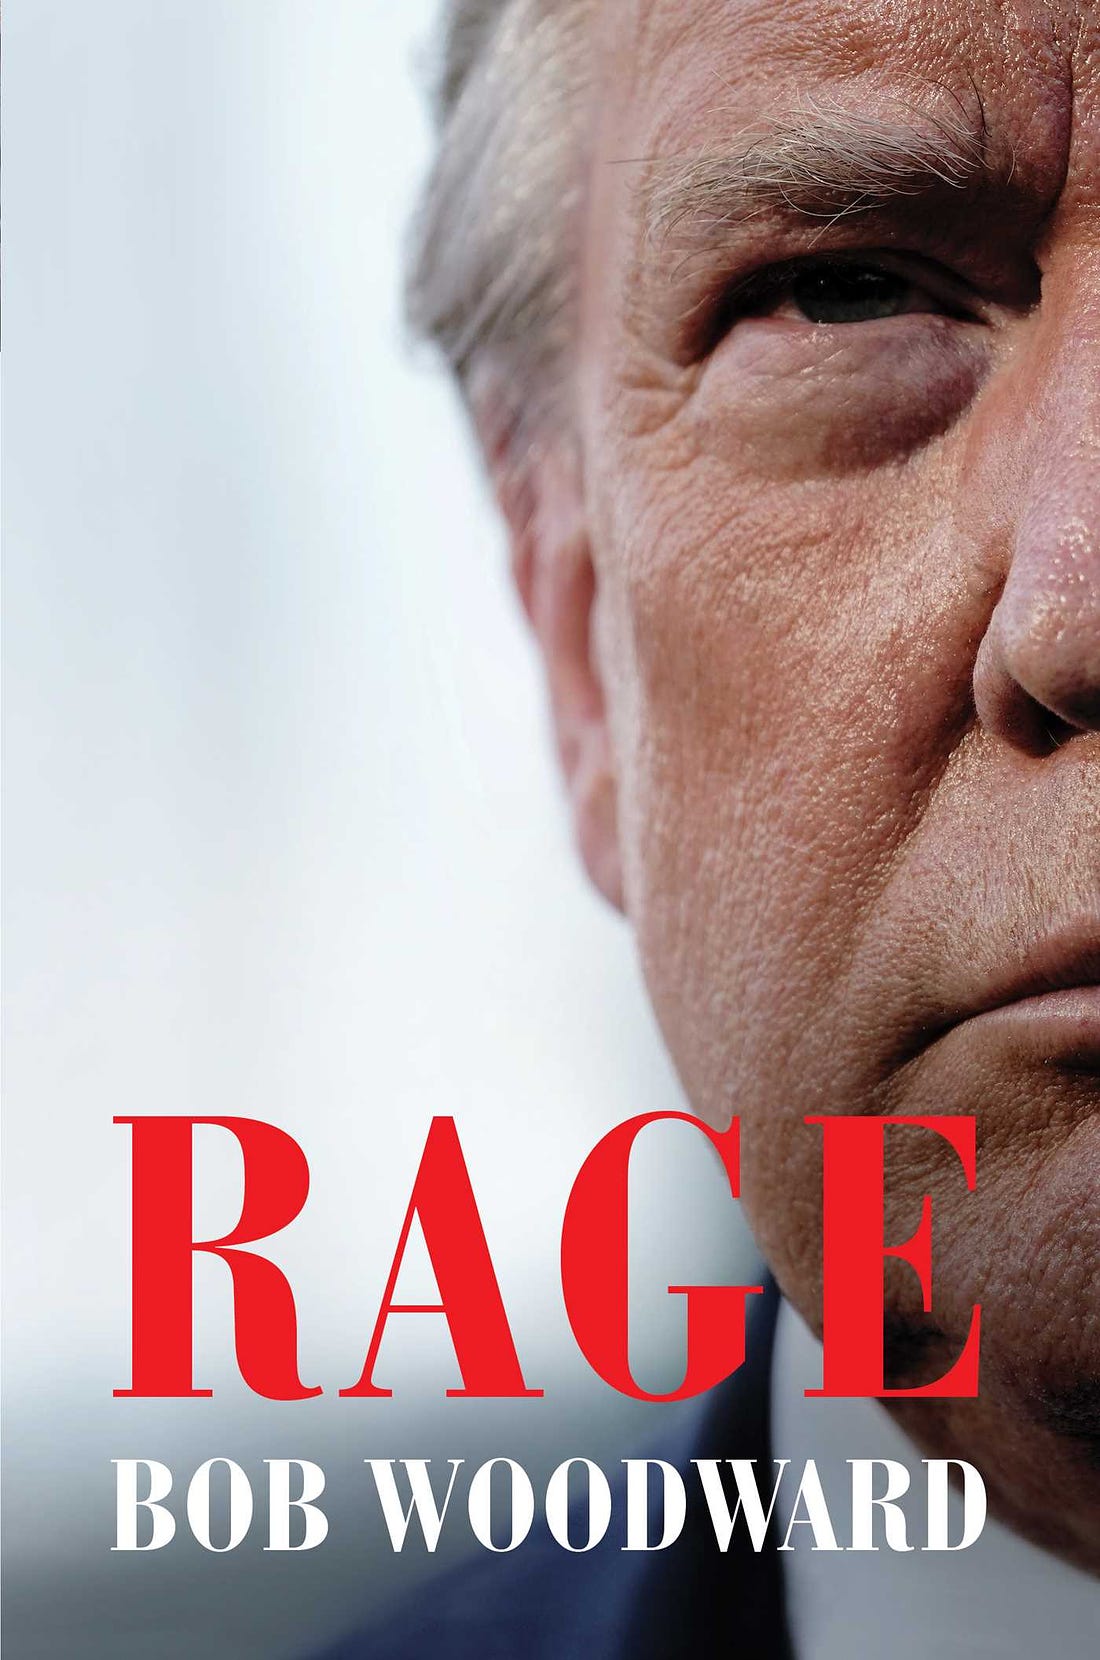 The cover of Bob Woodward's book about President Trump, titled <em>Rage.</em>